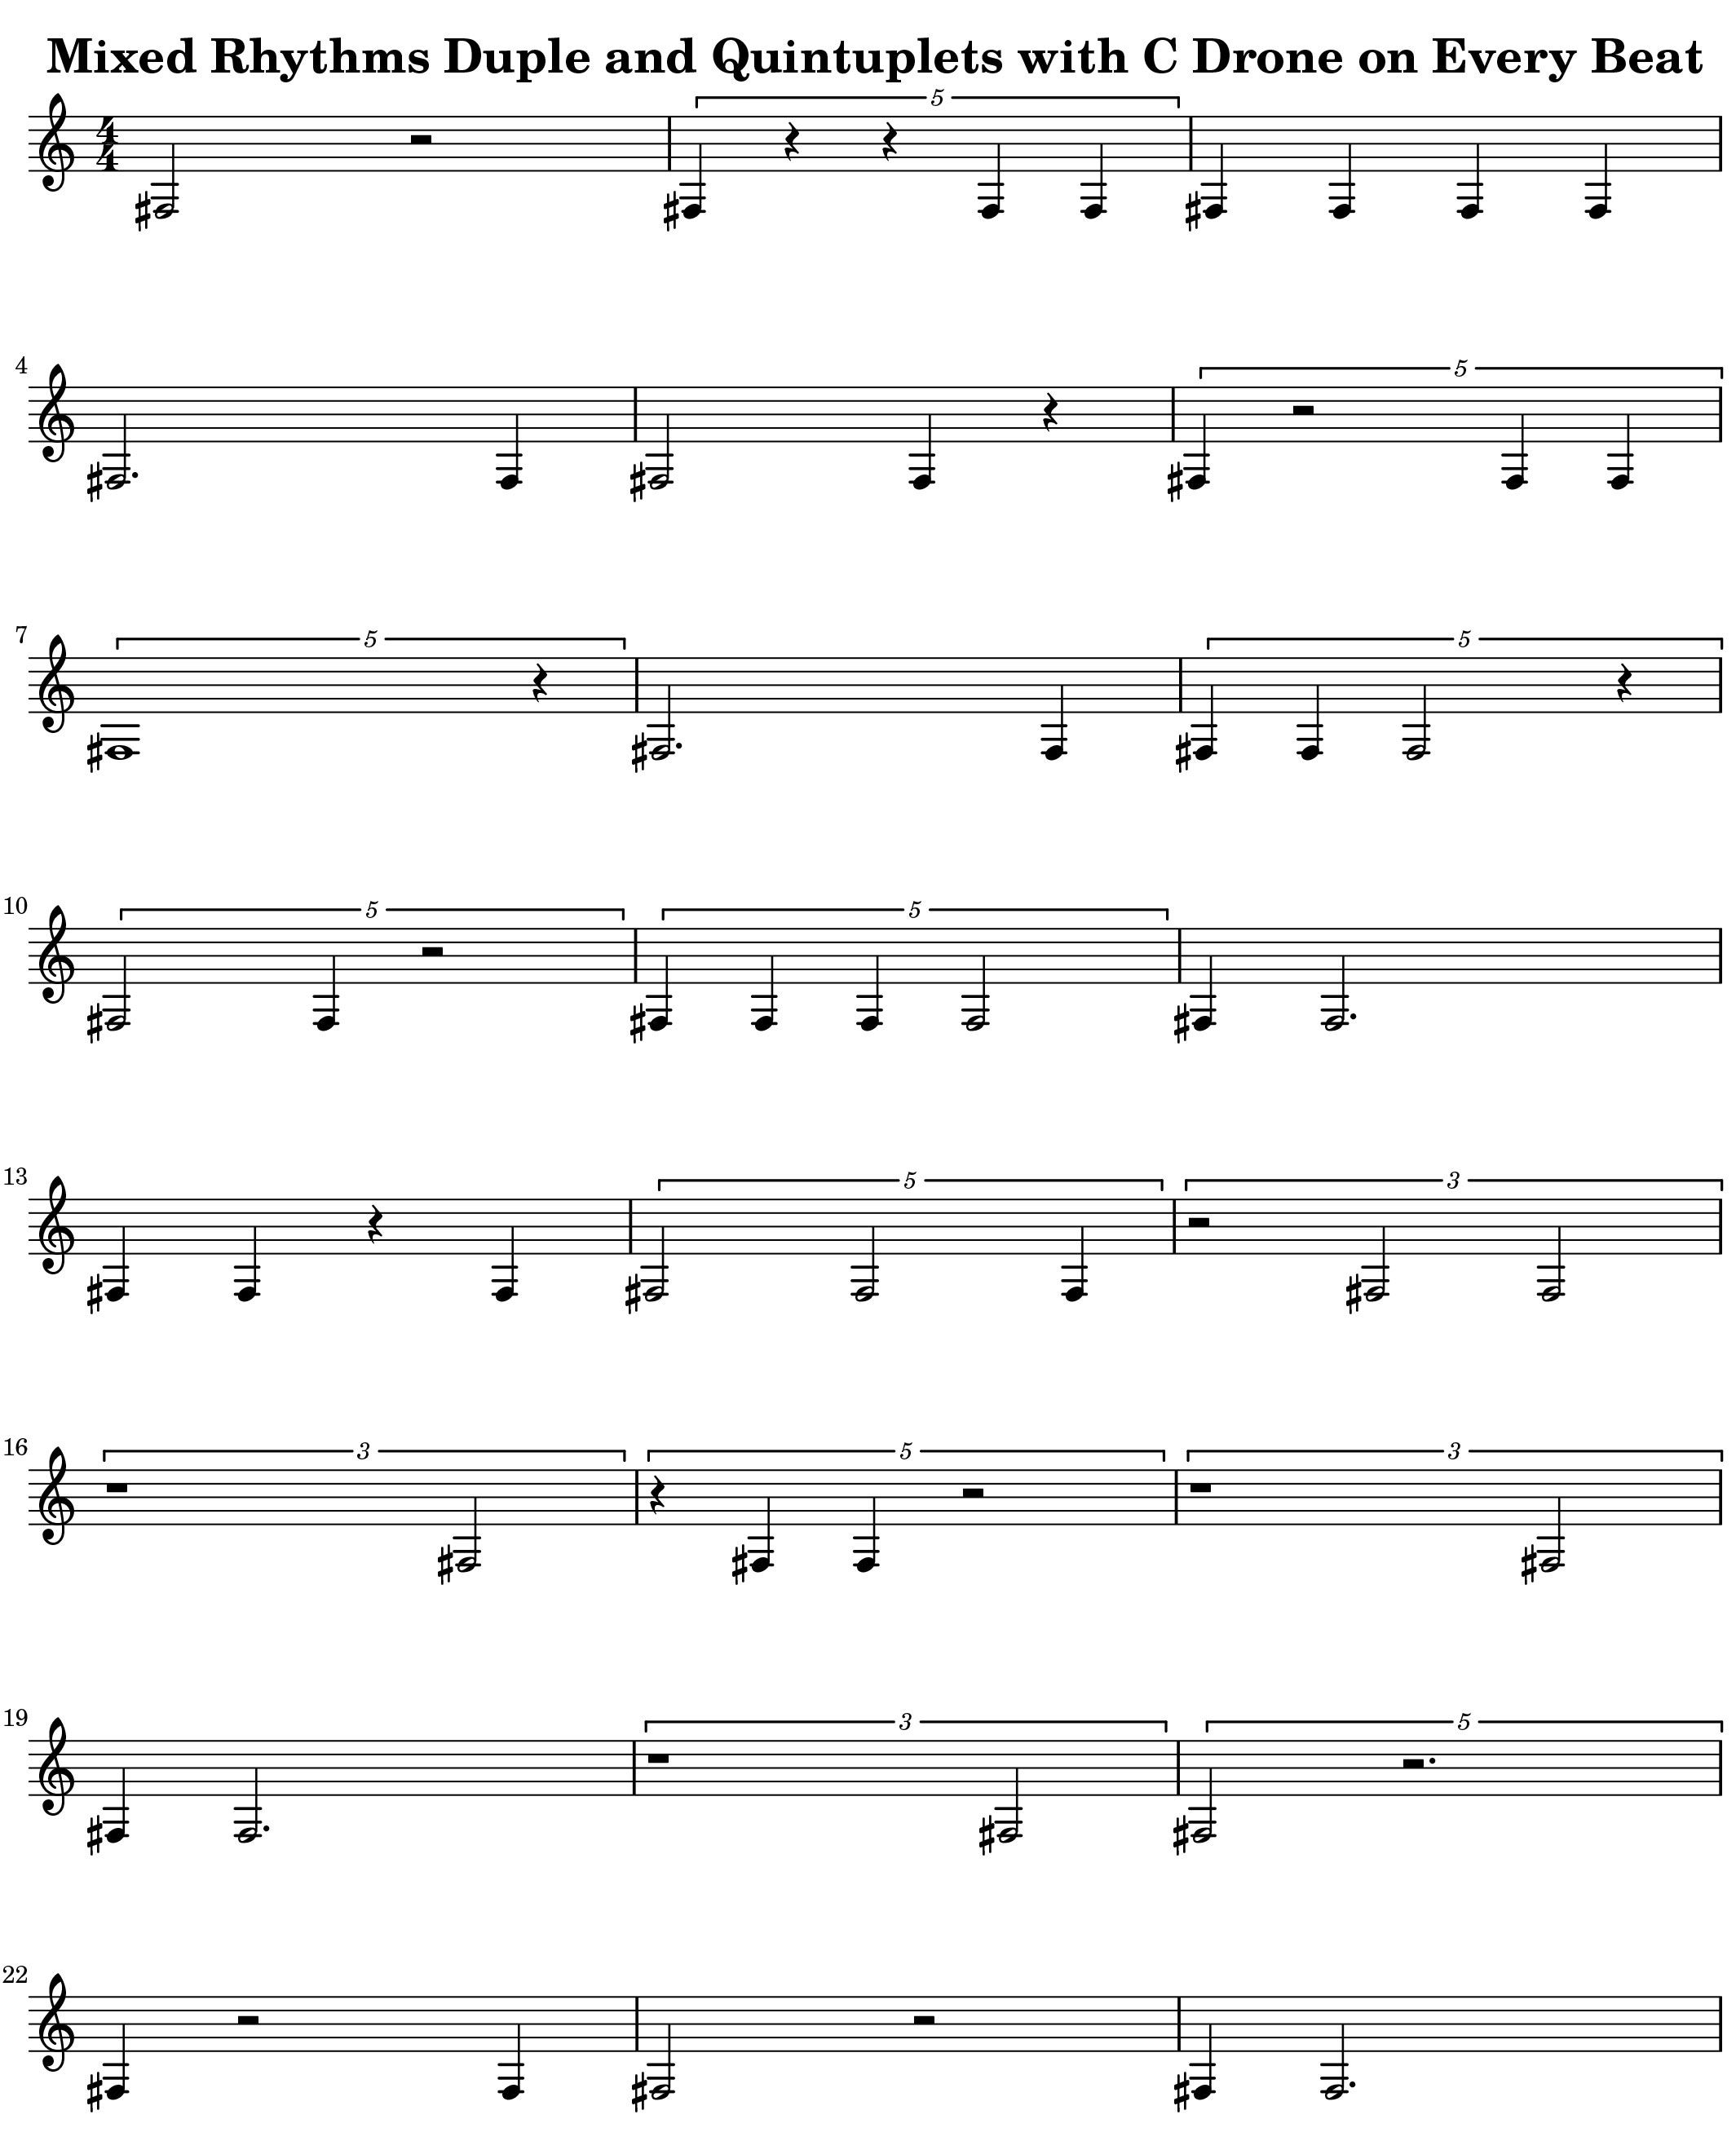 Rhythms Volume 9 Duplet and Quintuplet Rhythms with Whole and Half Notes